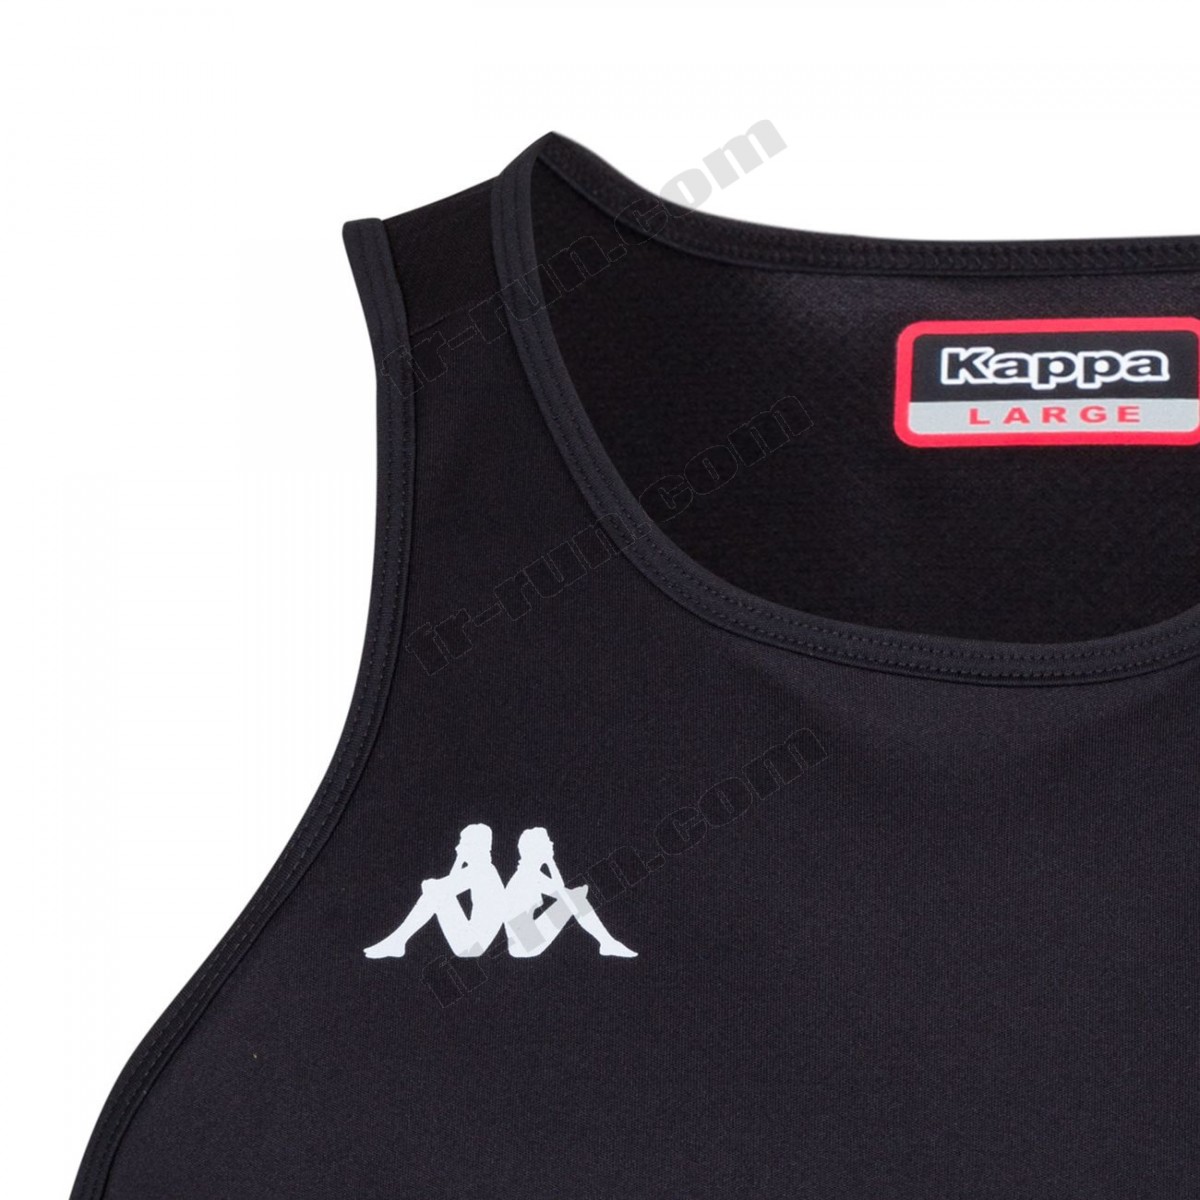 Kappa/running homme KAPPA Maillot manches courtes FANTO - Noir - Homme √ Nouveau style √ Soldes - -9